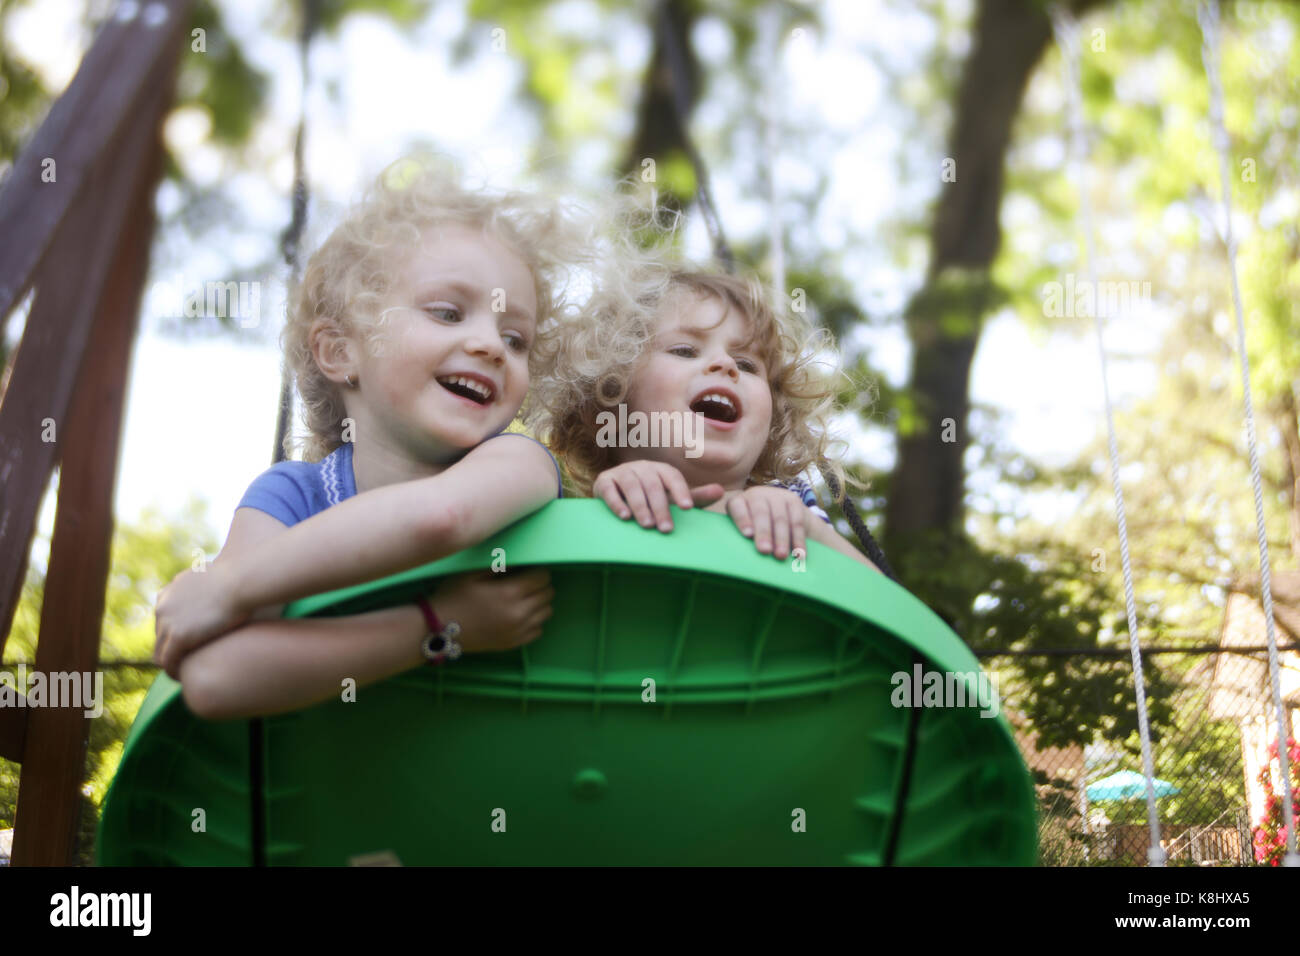 Low angle view of sisters playing on outdoor play equipment at playground Stock Photo